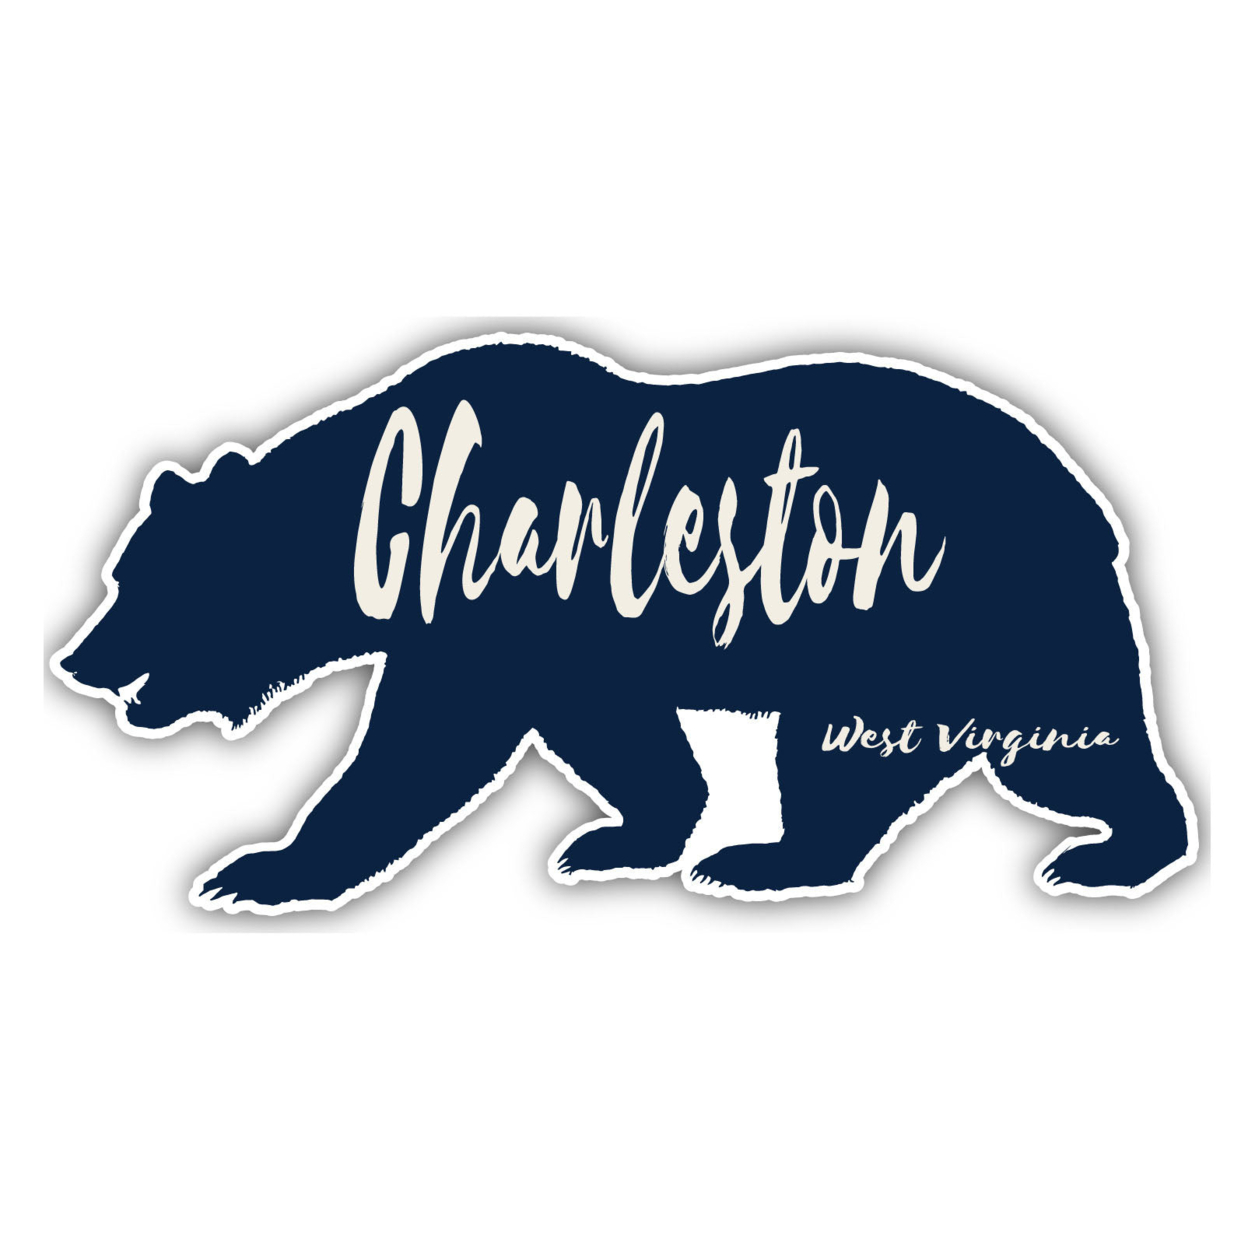 Charleston West Virginia Souvenir Decorative Stickers (Choose Theme And Size) - 4-Pack, 10-Inch, Tent